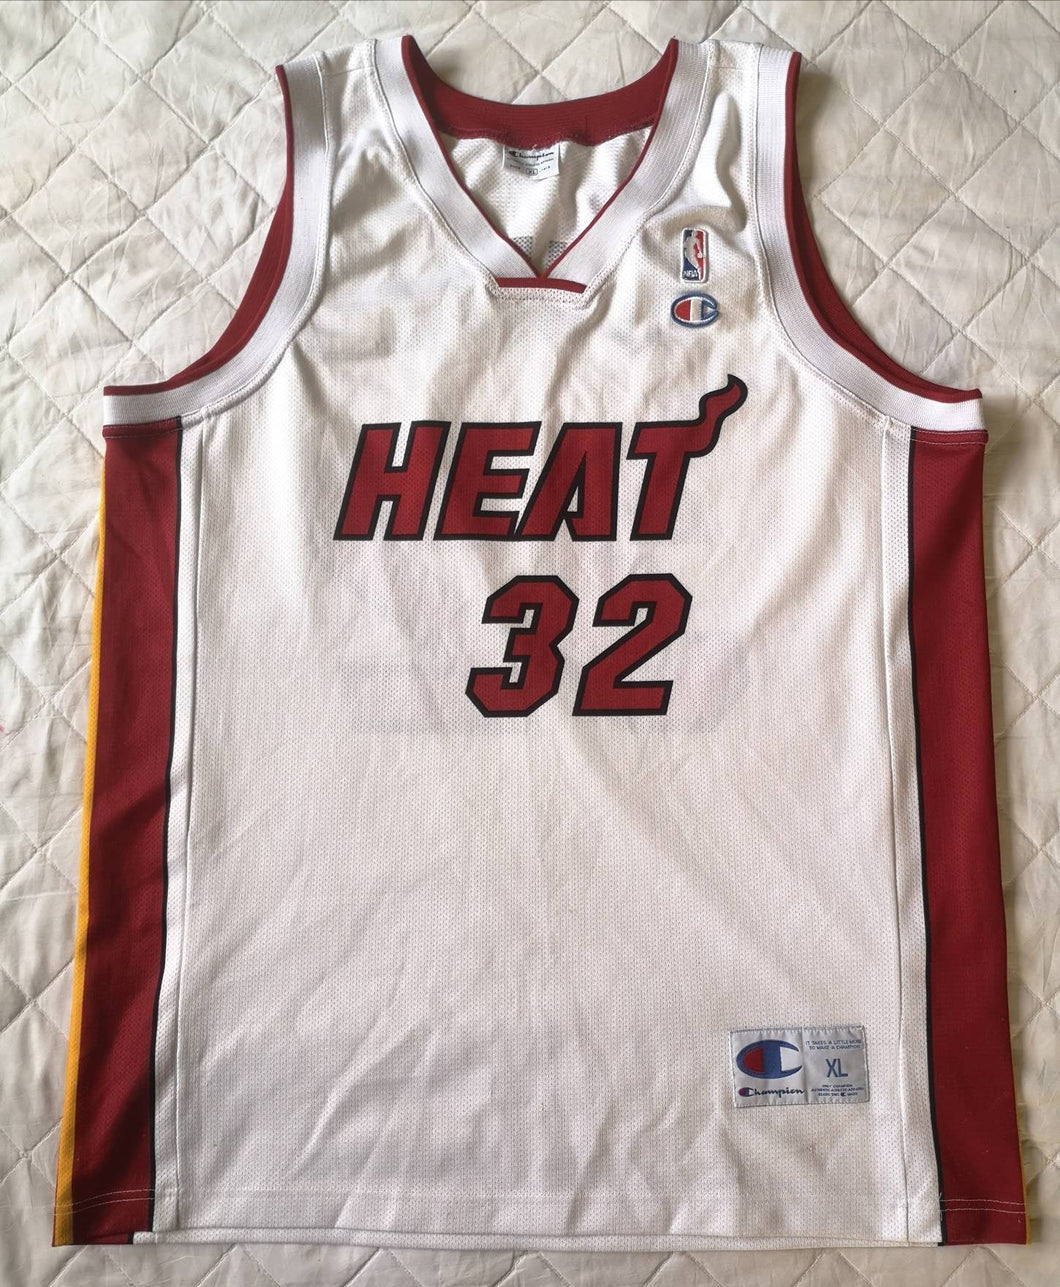 Authentic jersey Shaquille O'Neal Miami Heat NBA Champion Vintage